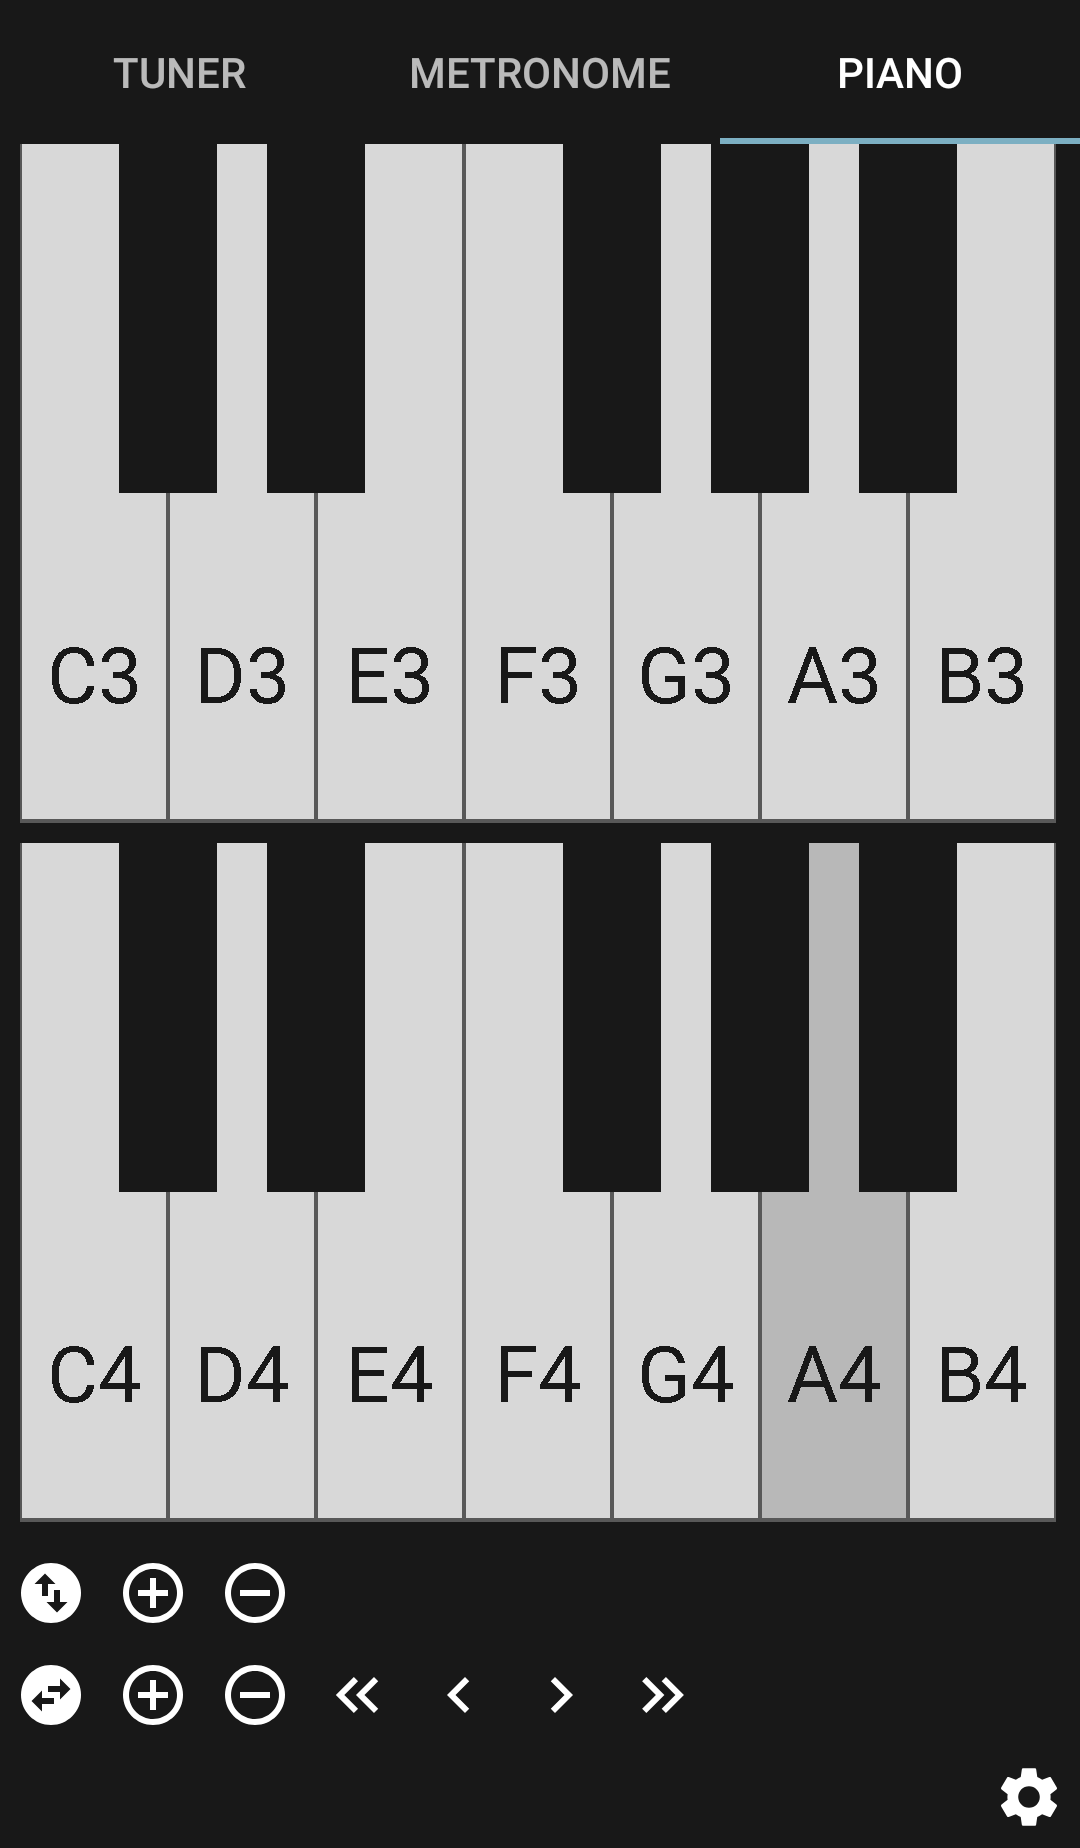 what is a semitone in piano